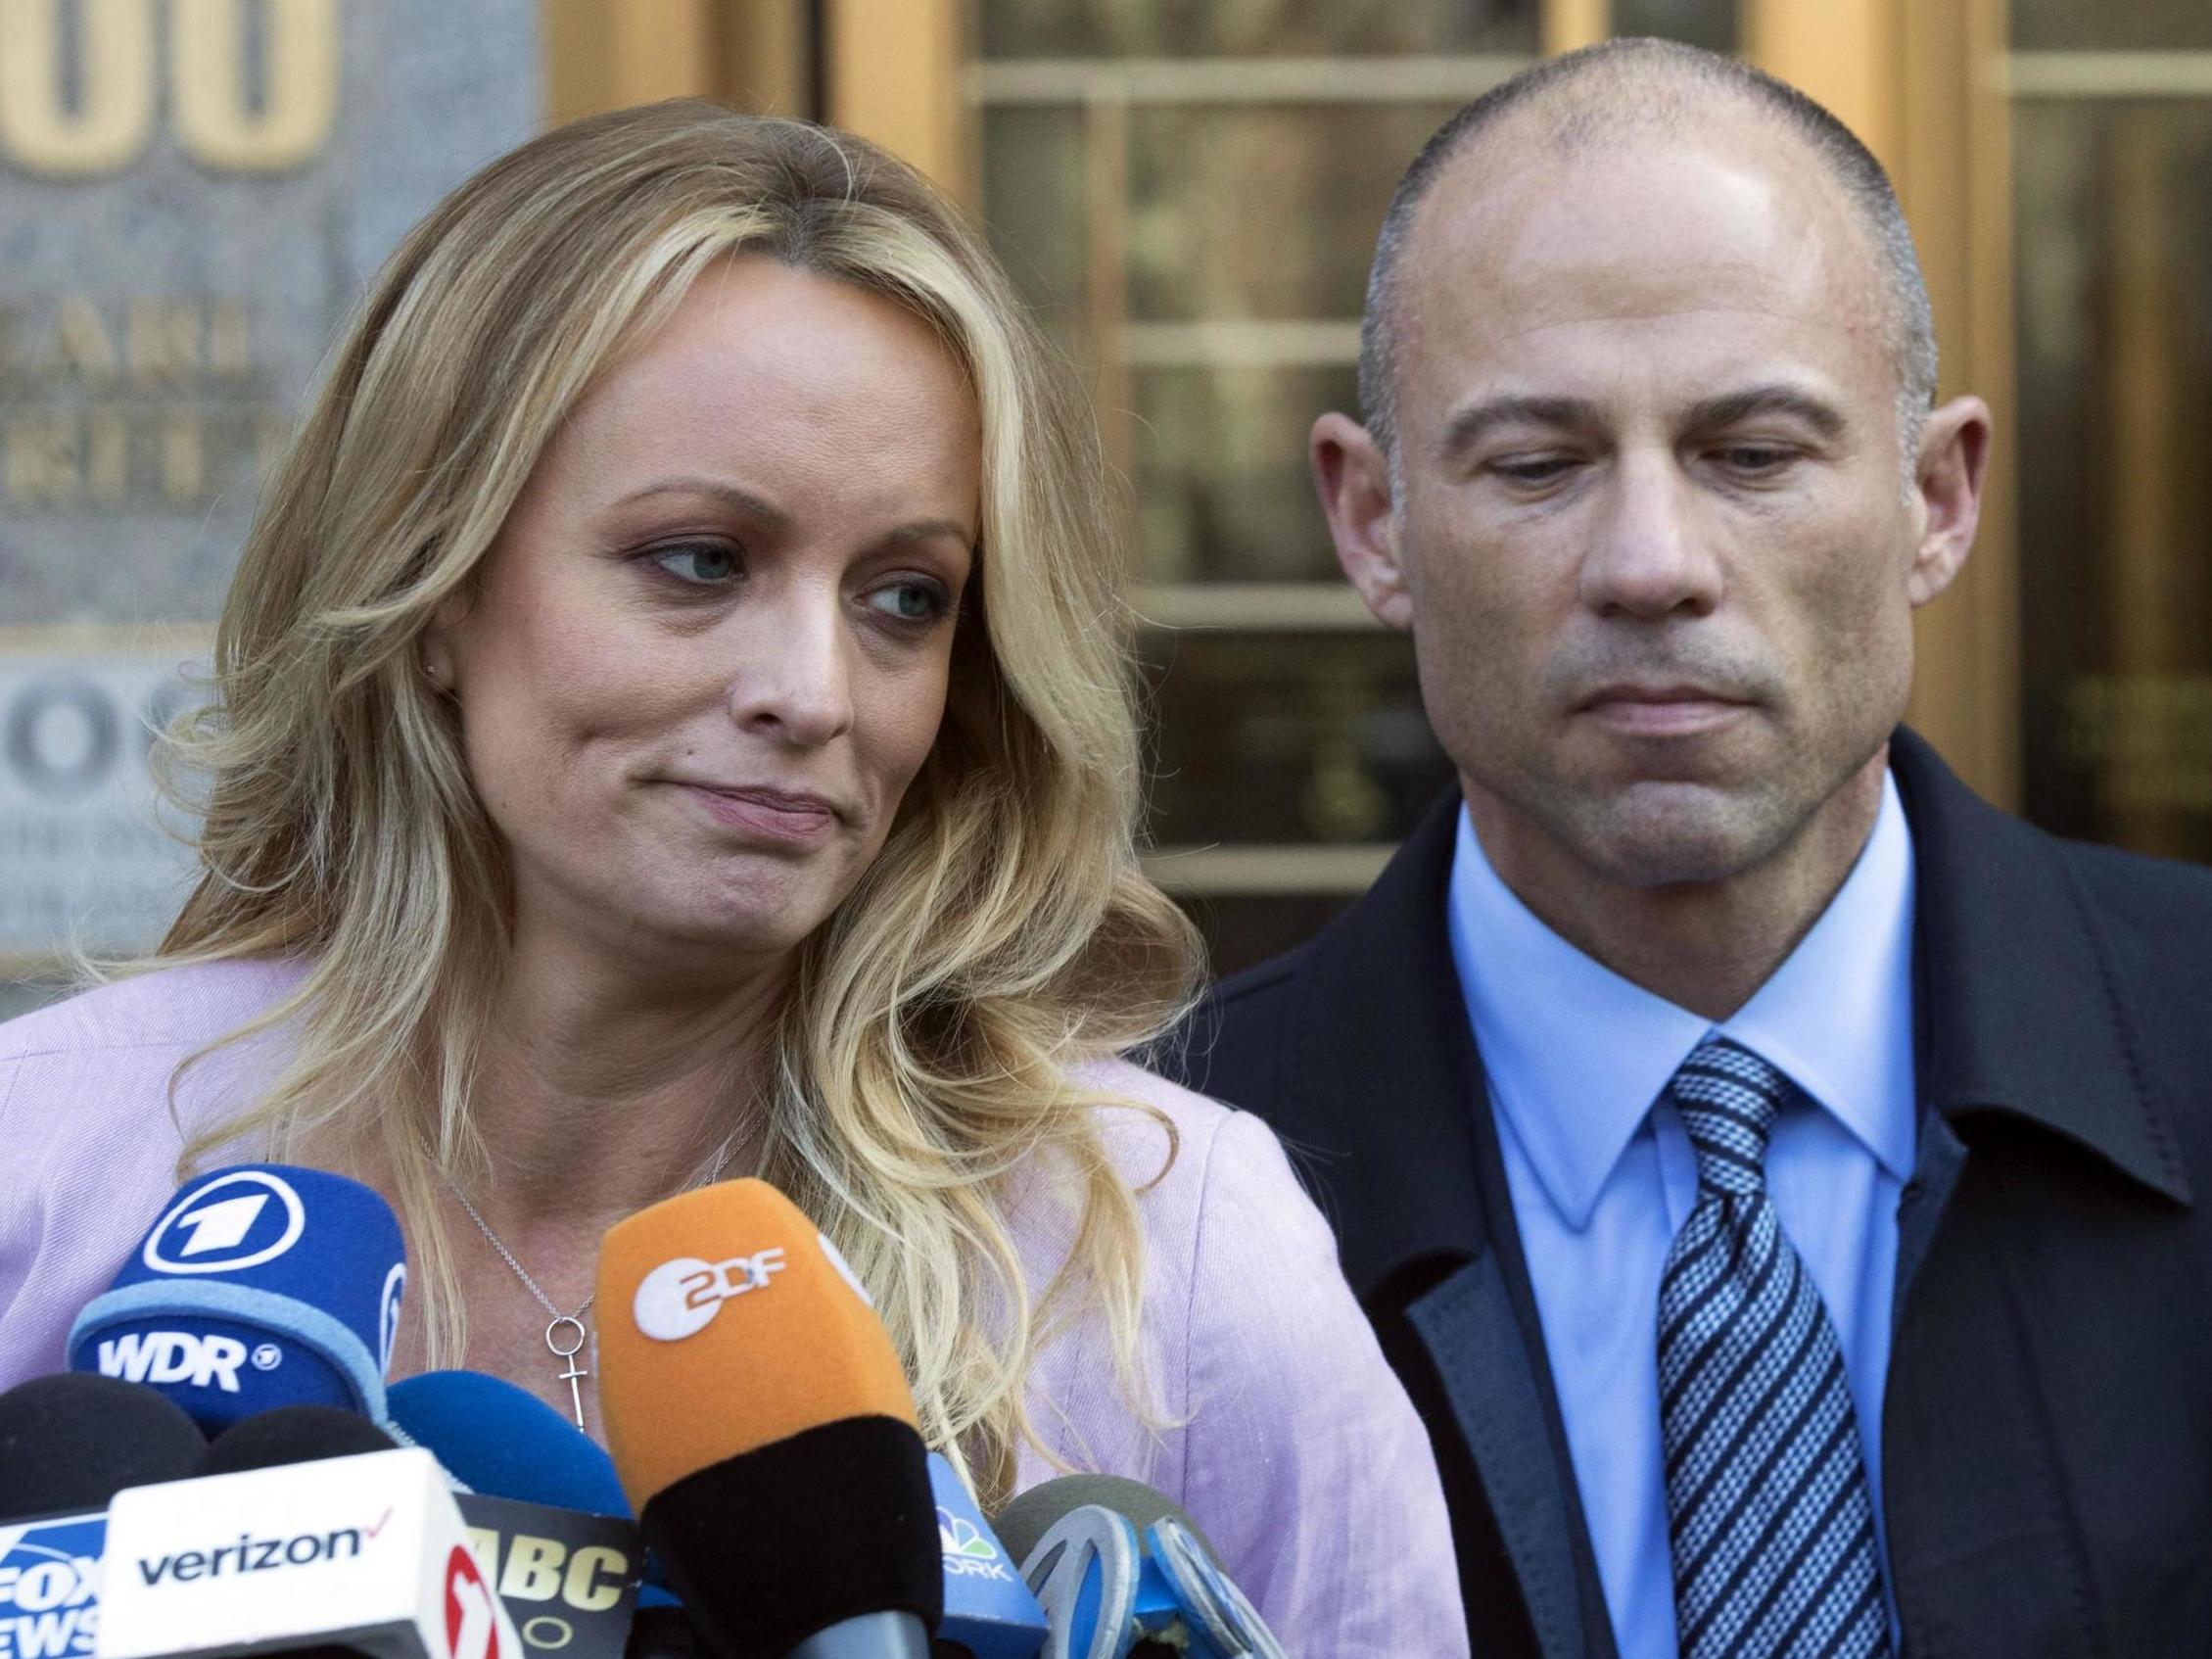 Stormy Daniels, whose given name is Stephanie Clifford, and her attorney Michael Avenatti at a press release outside federal court in New York City April 16 2018